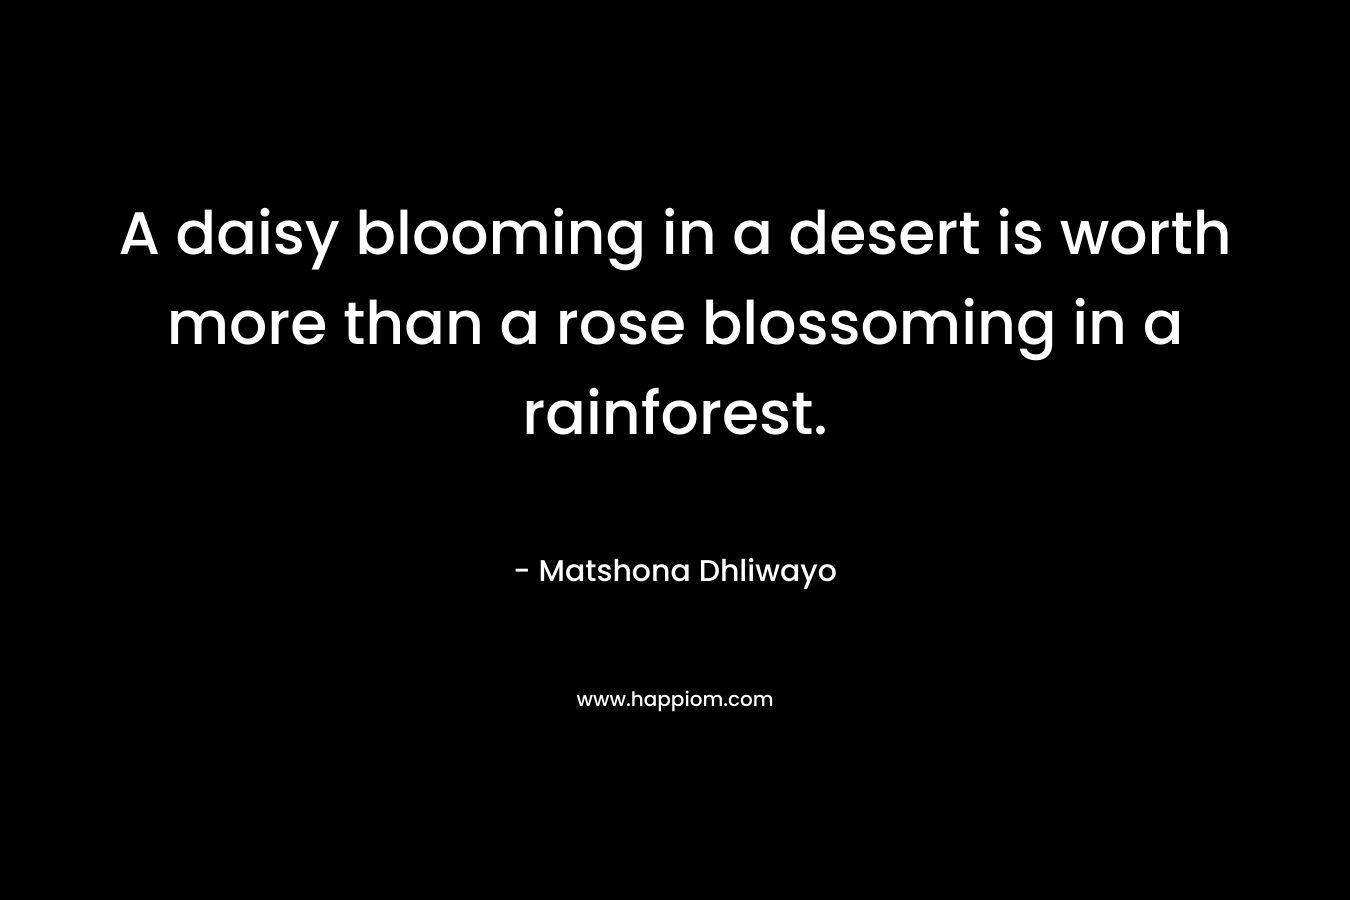 A daisy blooming in a desert is worth more than a rose blossoming in a rainforest. – Matshona Dhliwayo